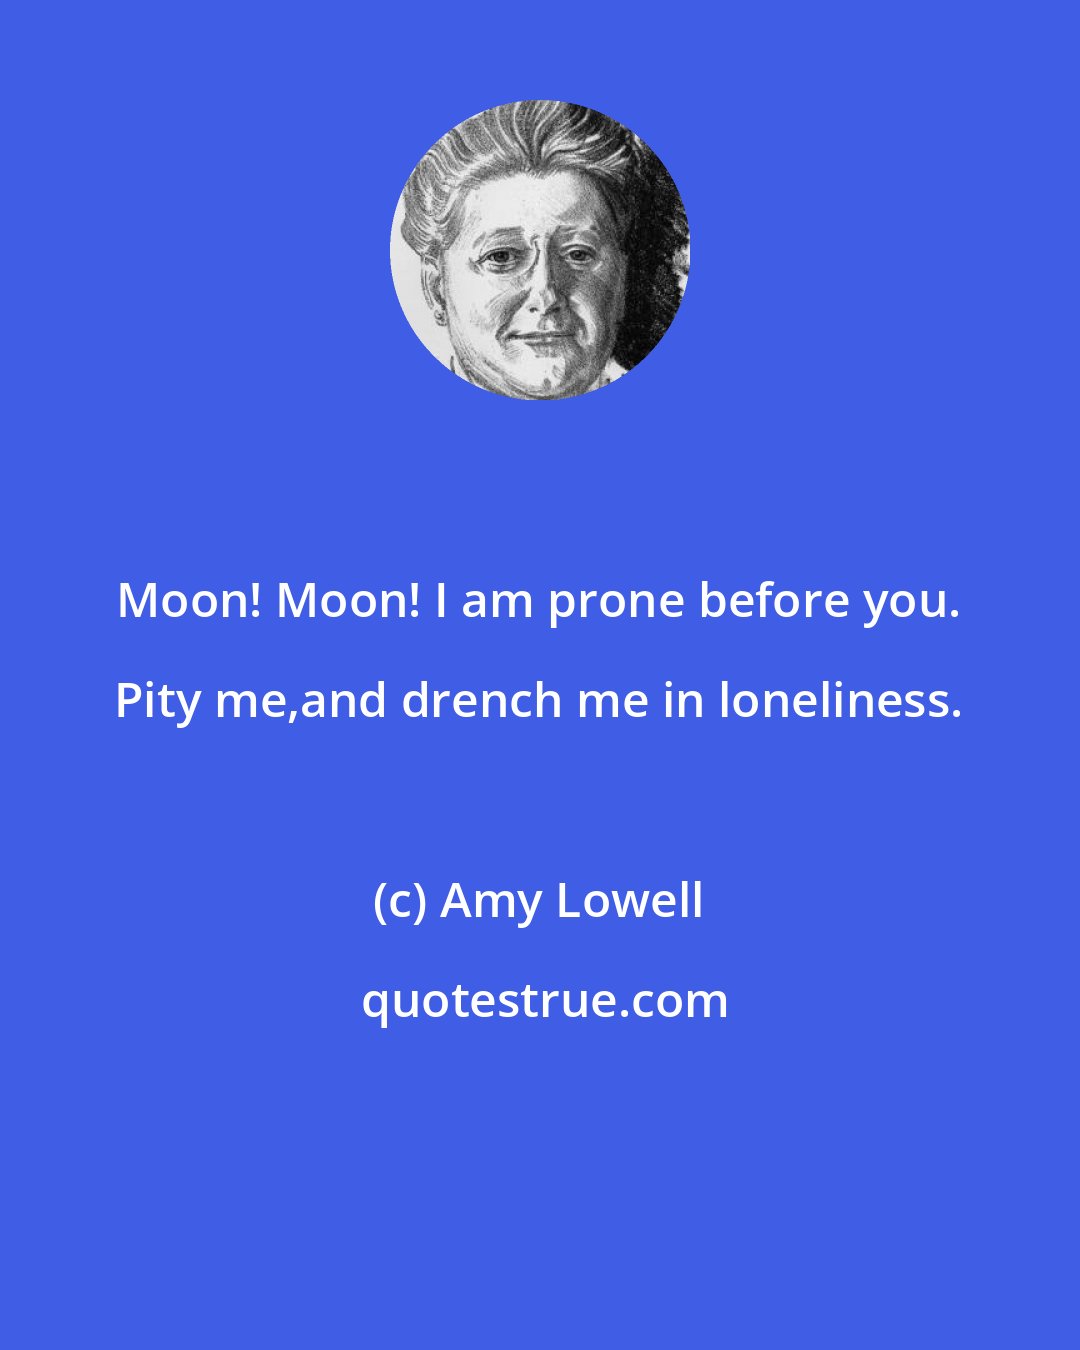 Amy Lowell: Moon! Moon! I am prone before you. Pity me,and drench me in loneliness.